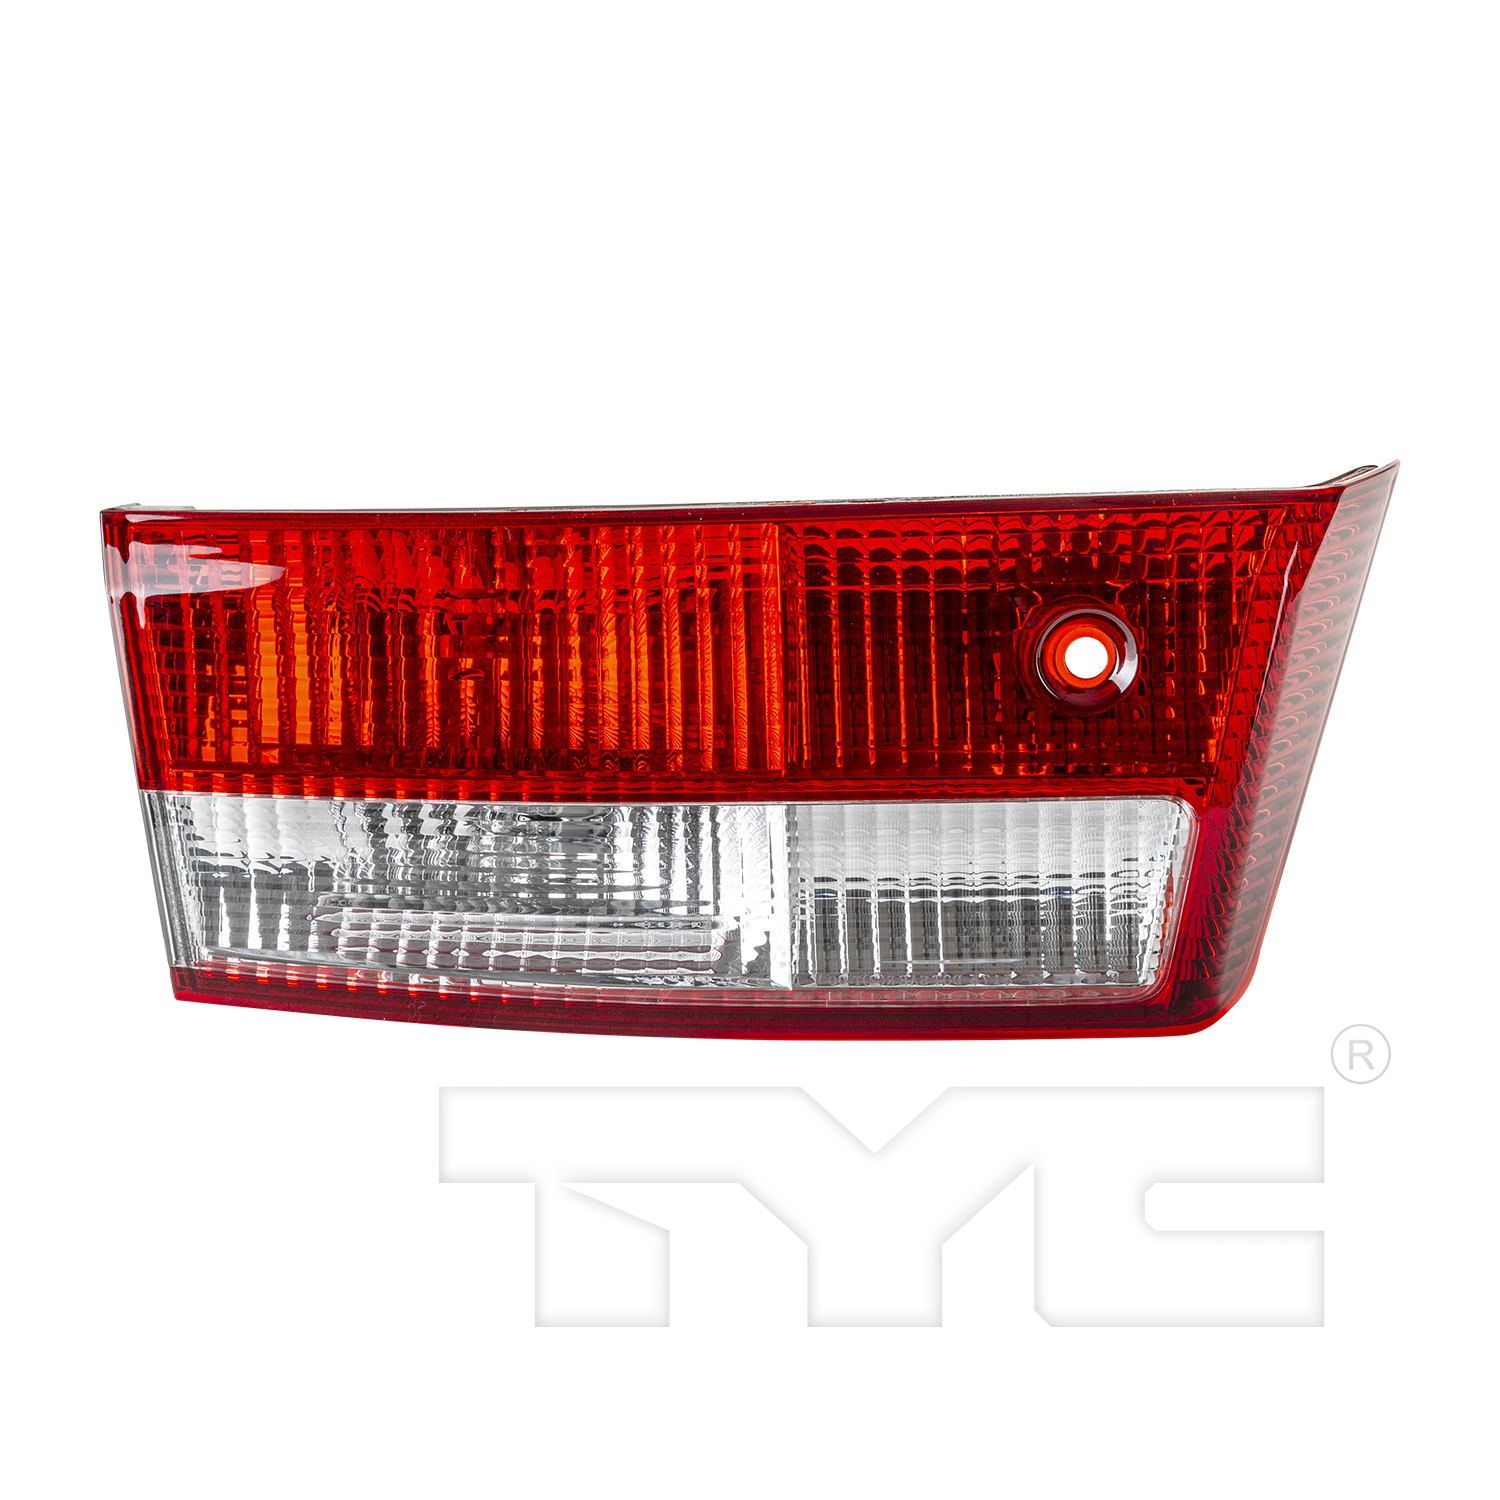 Aftermarket TAILLIGHTS for HONDA - ACCORD, ACCORD,03-05,LT Taillamp assy